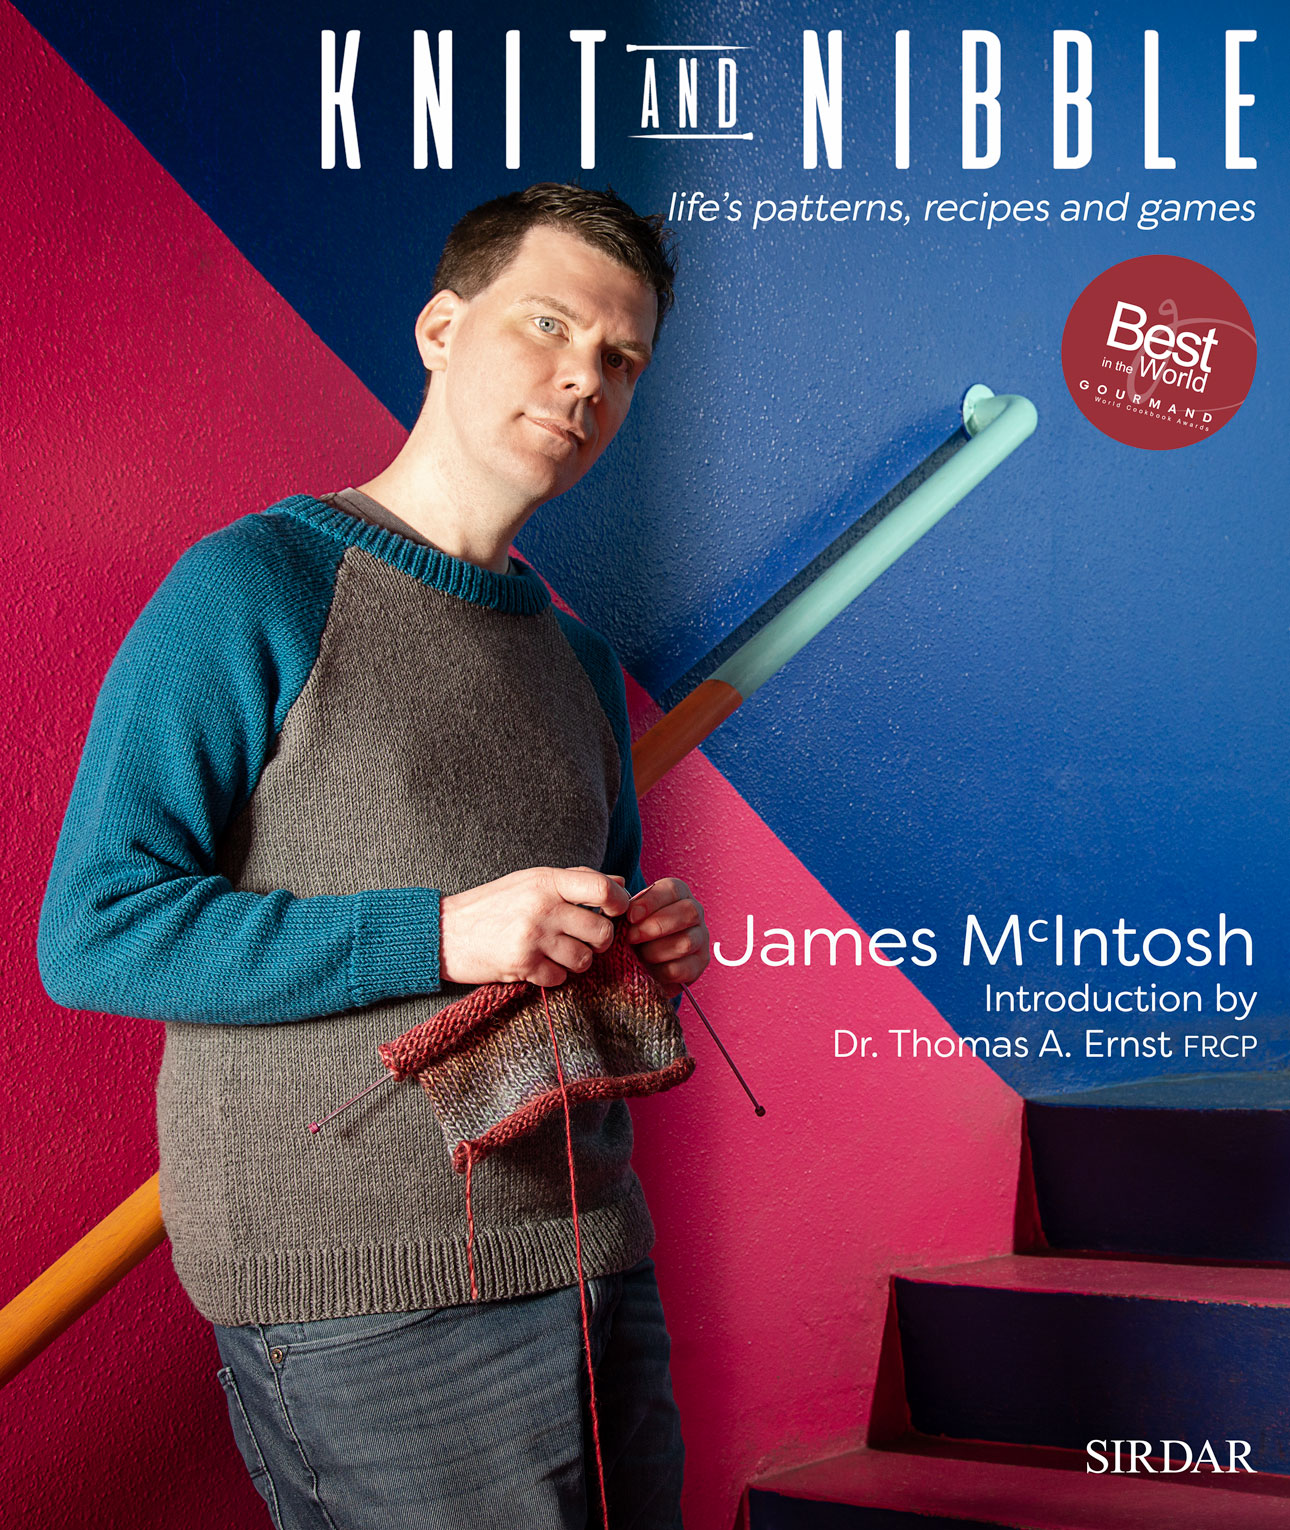 What can i knit for a man